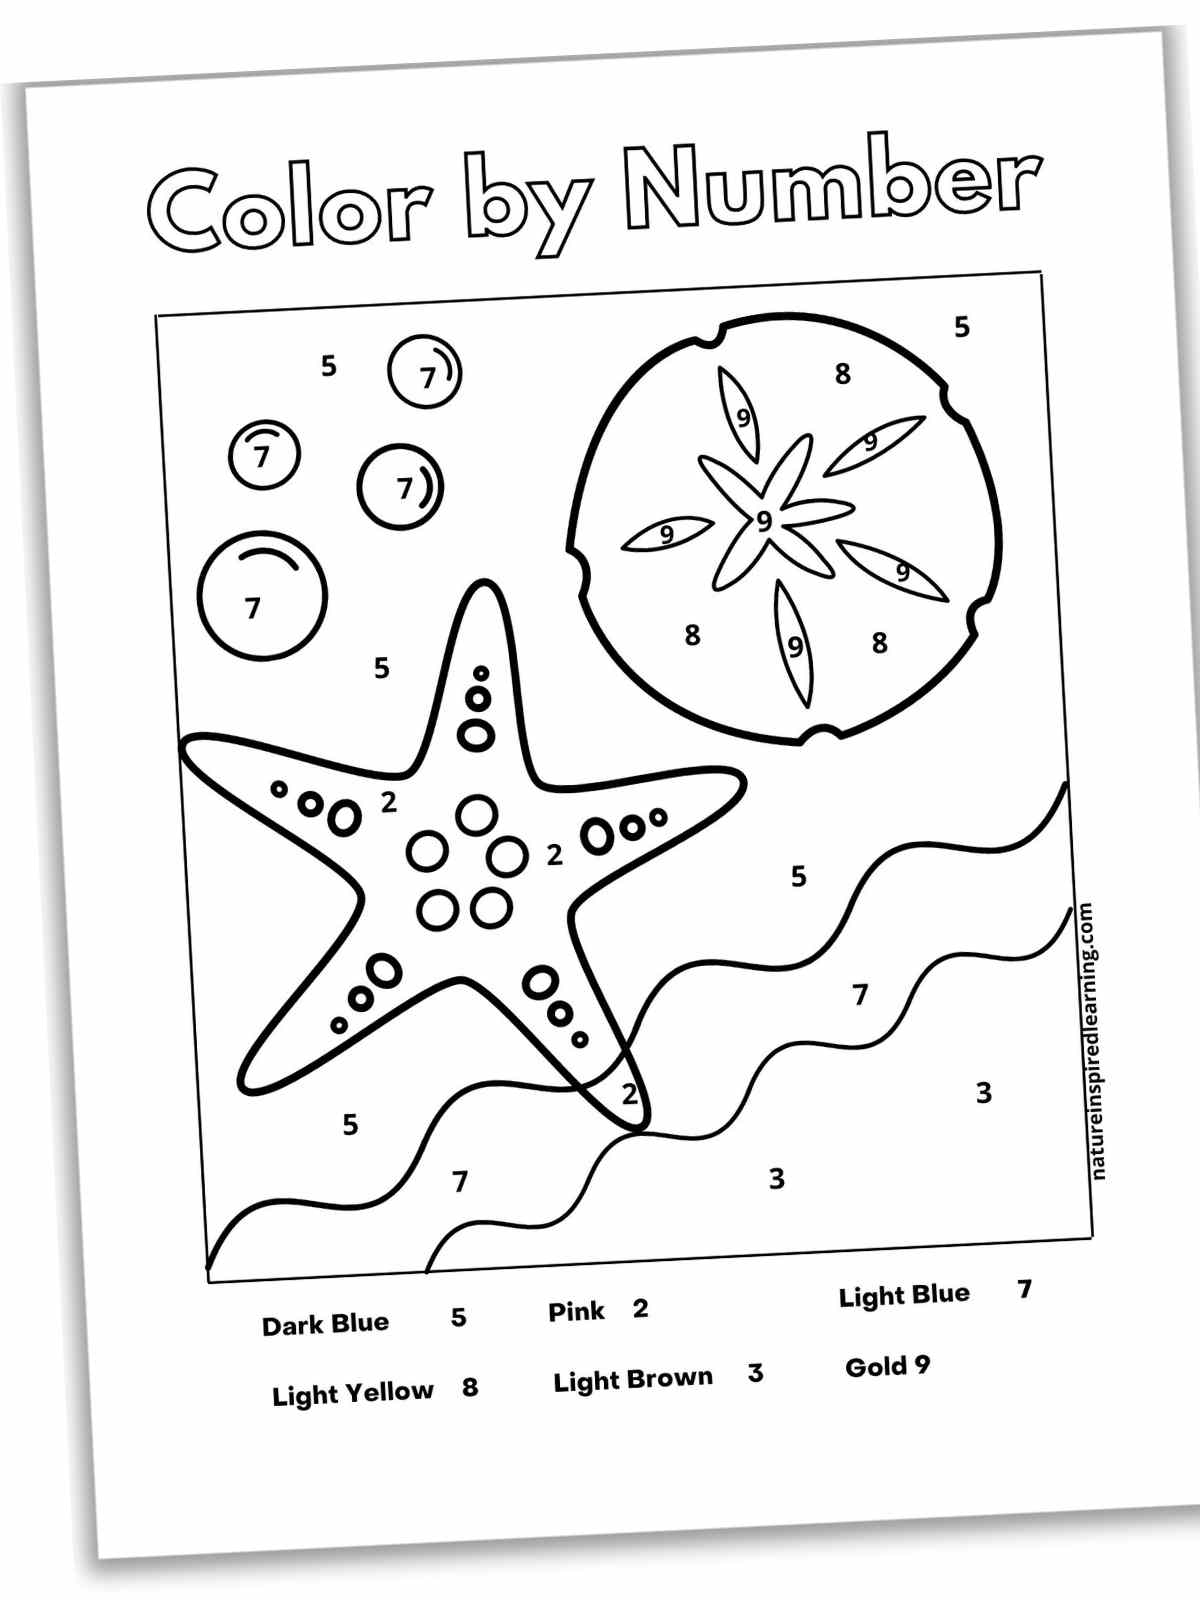 black and white printable with ocean water, waves, sand dollar, starfish, and bubbles with numbers inside the designs and a color key below slanted with a drop shadow.